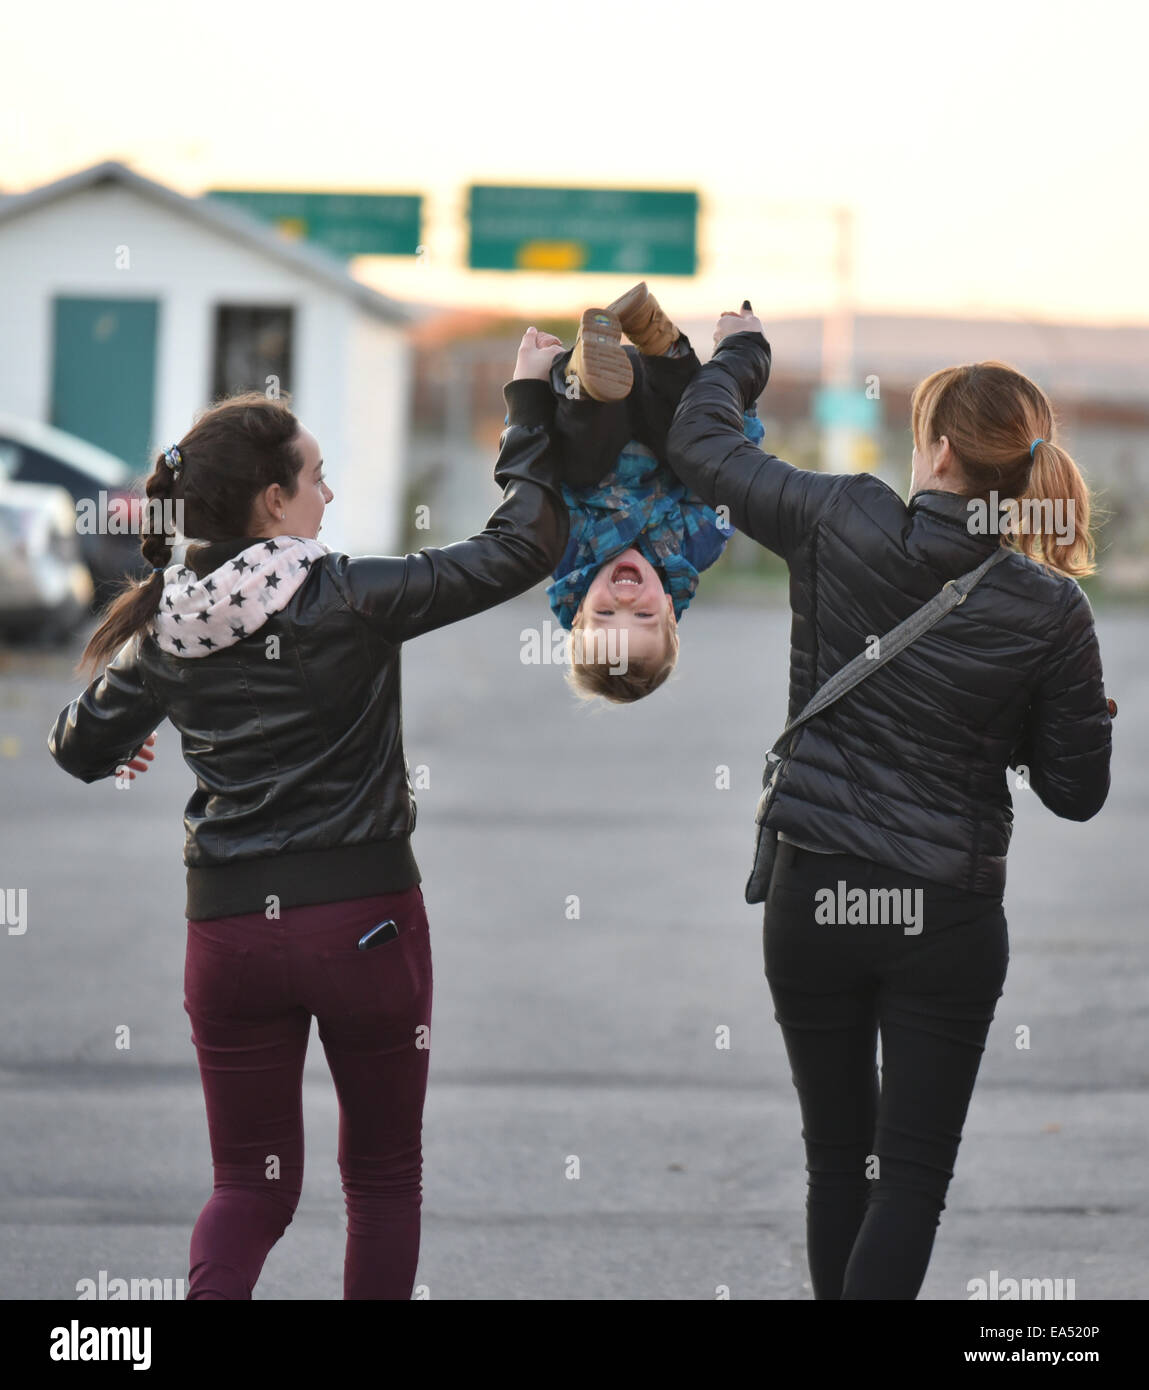 A two year old being thrown in the air by two women Stock Photo